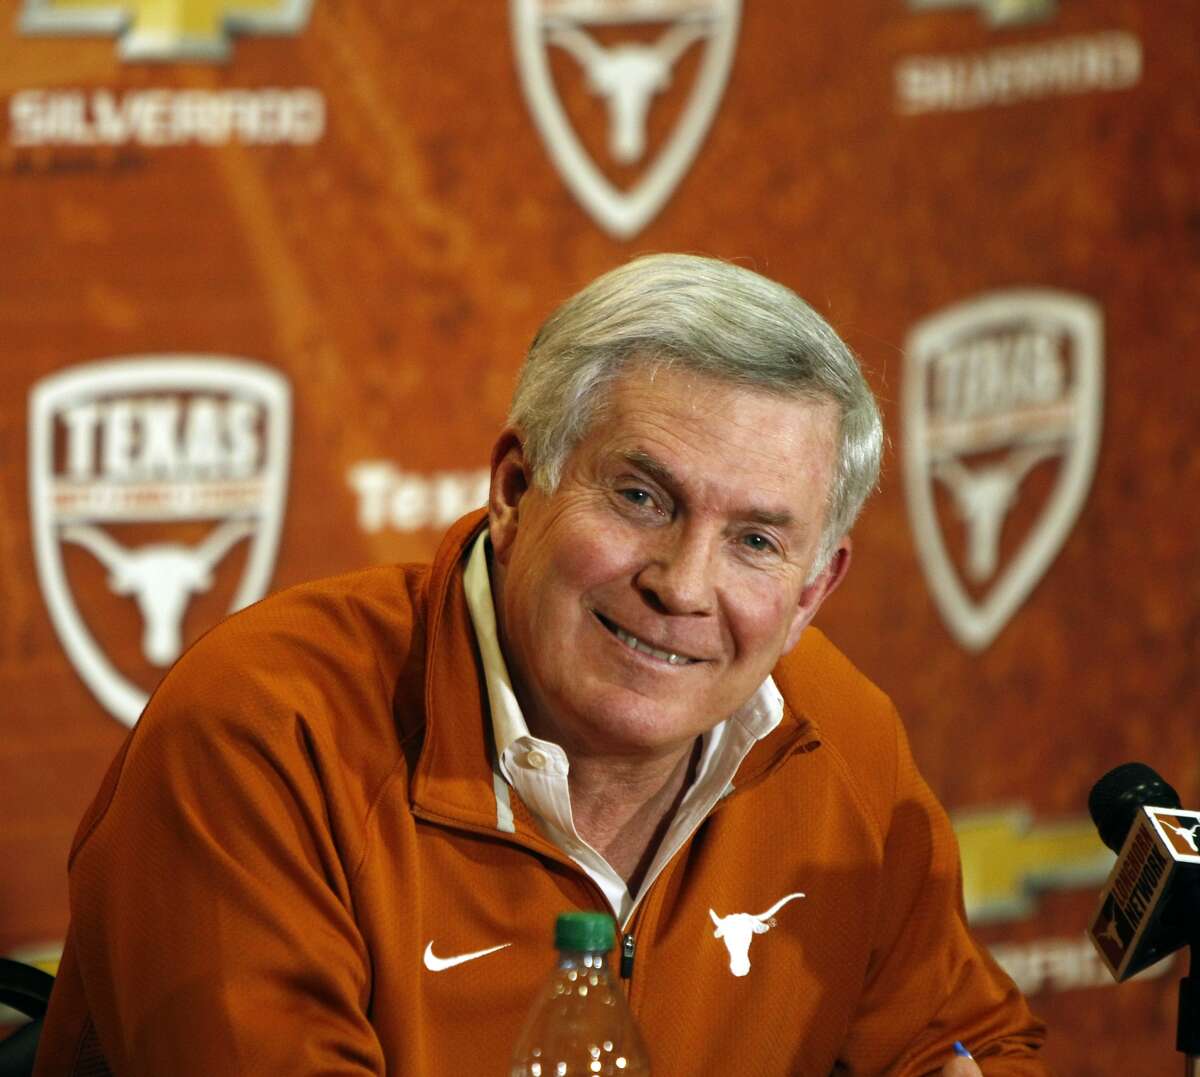 Mack Brown led Texas to a 158-48 record during his 16-season stint as the Longhorns' head coach from 1998-2013. (Getty Images) 